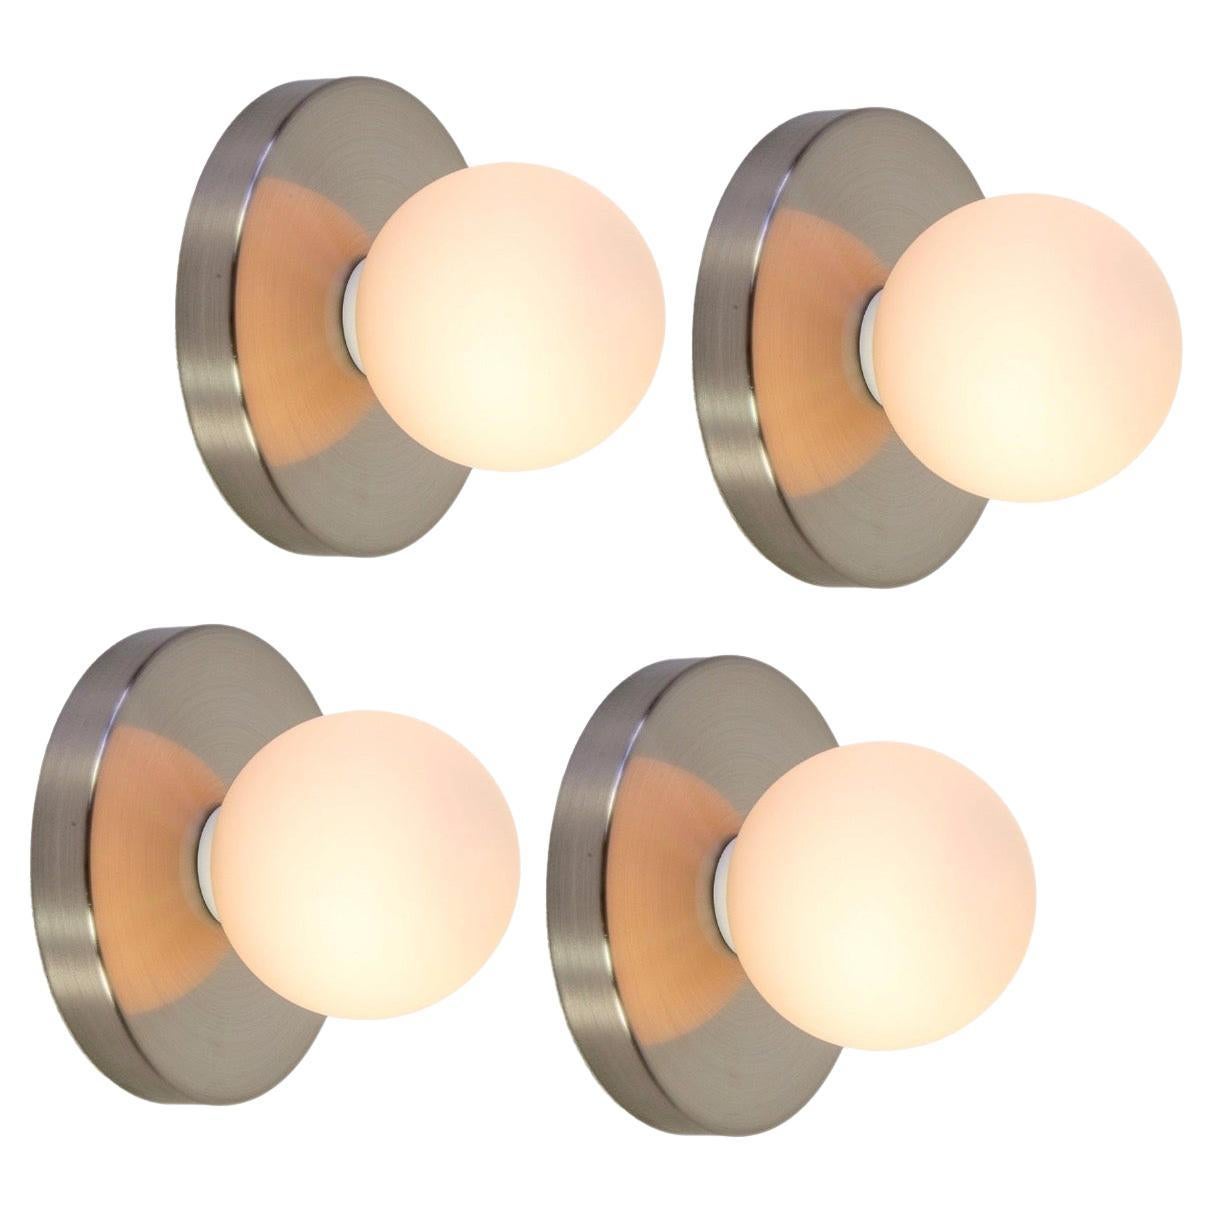 Set of 4 Globe Sconces by Research.Lighting, Brushed Nickel, Made to Order